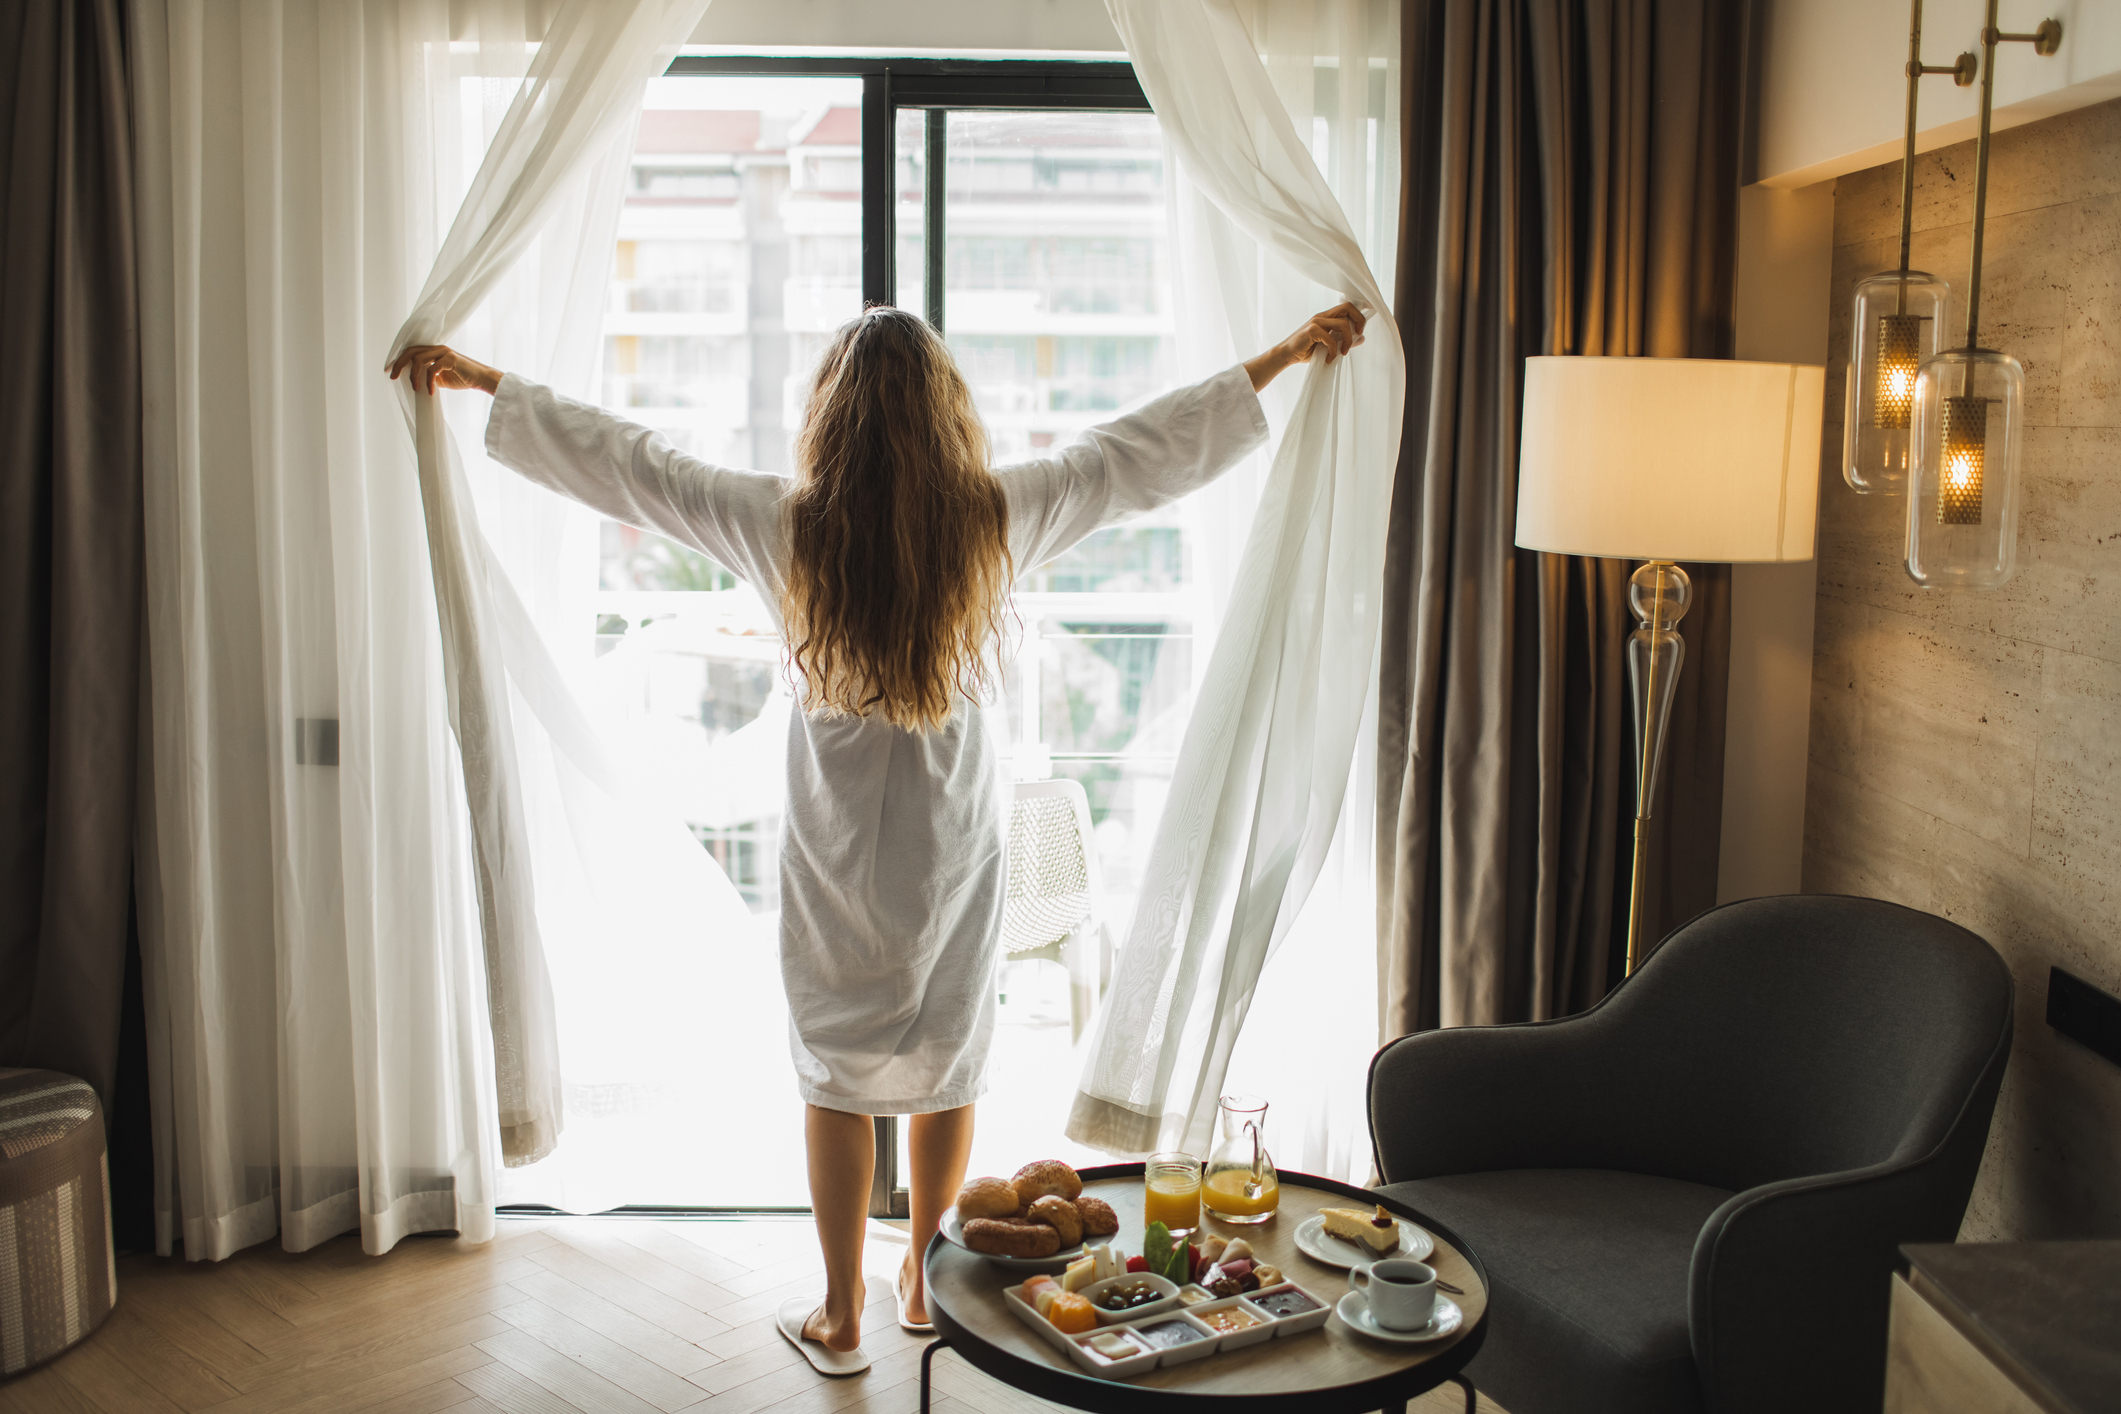 A woman opening curtains and letting the sunlight into her hotel room